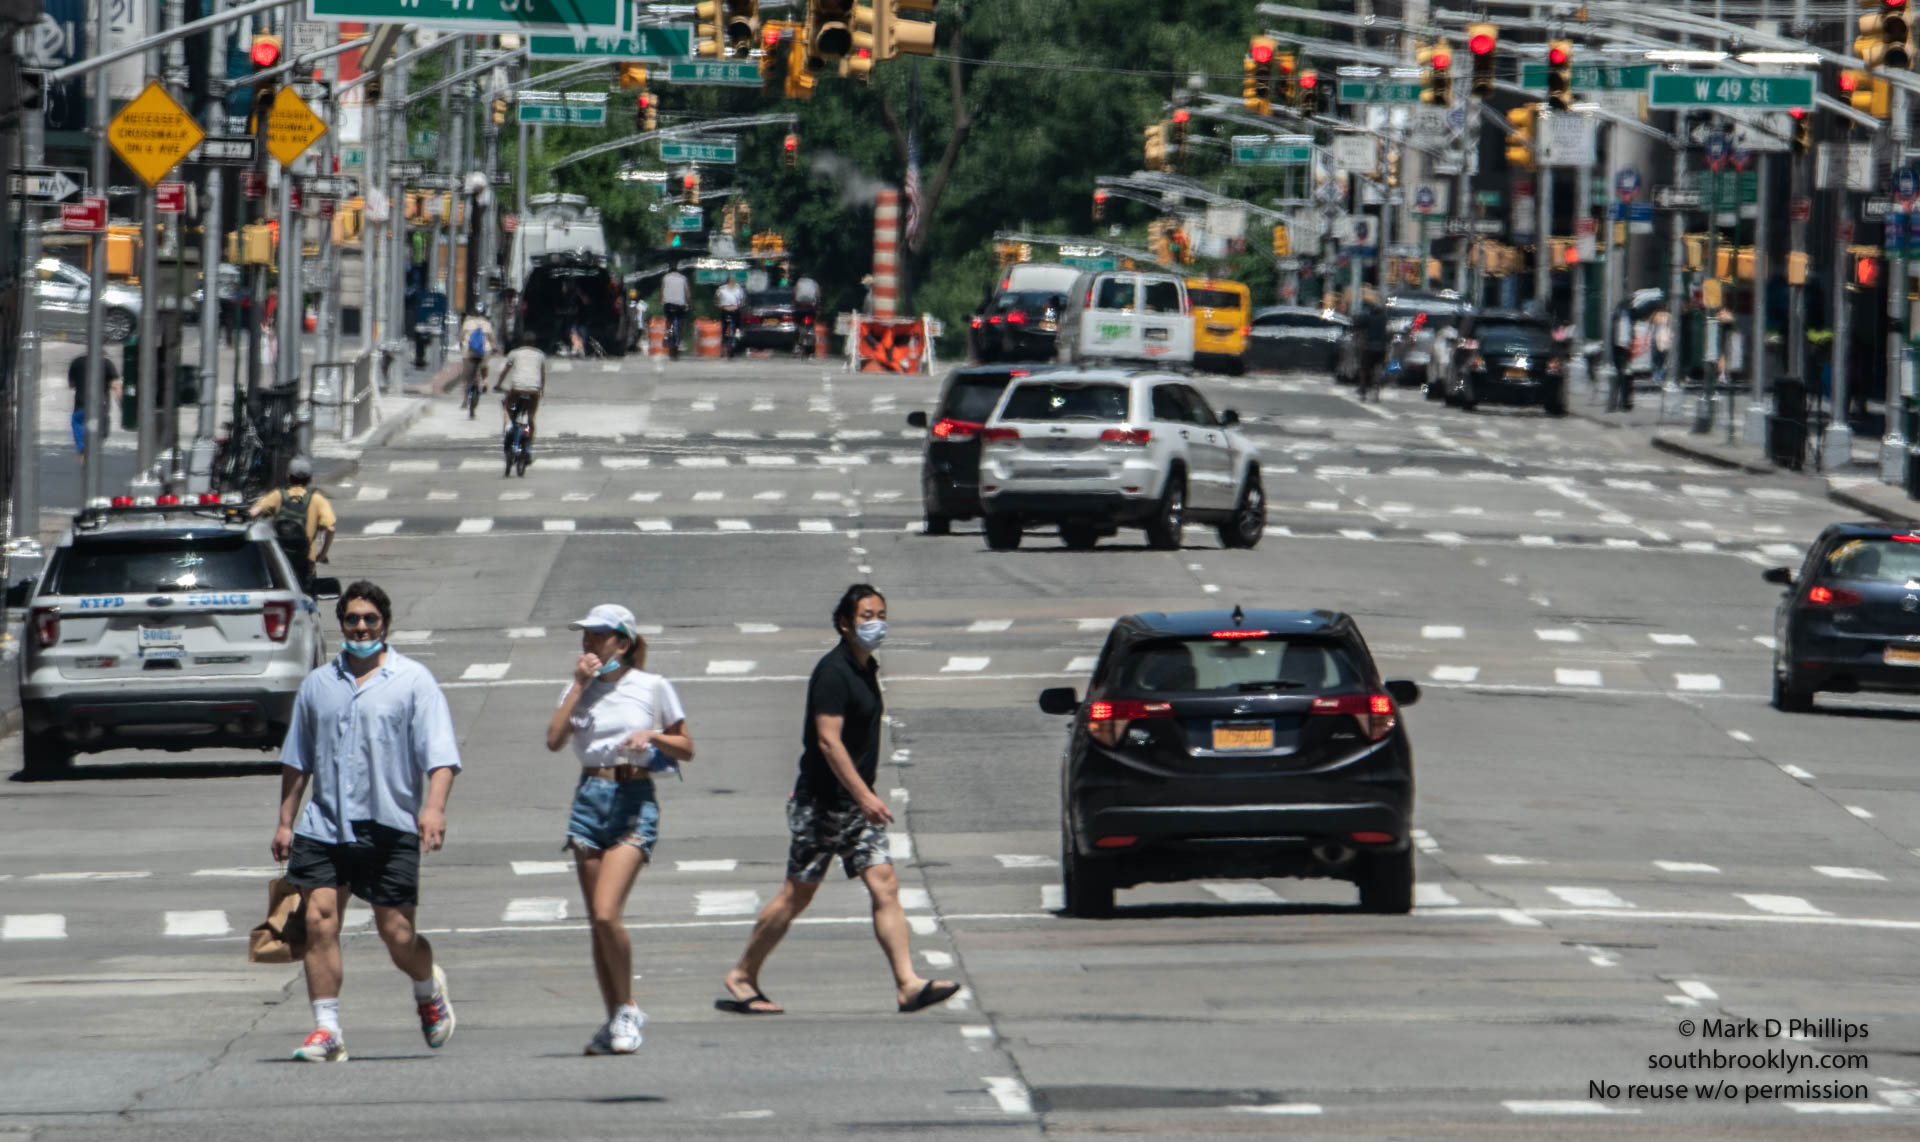 New York City on May 30, 2020, during the Covid-19 pandemic. Pedestrians and vehicles enjoy the emptiness of Sixth Avenue in Midtown. ©Mark D Phillips